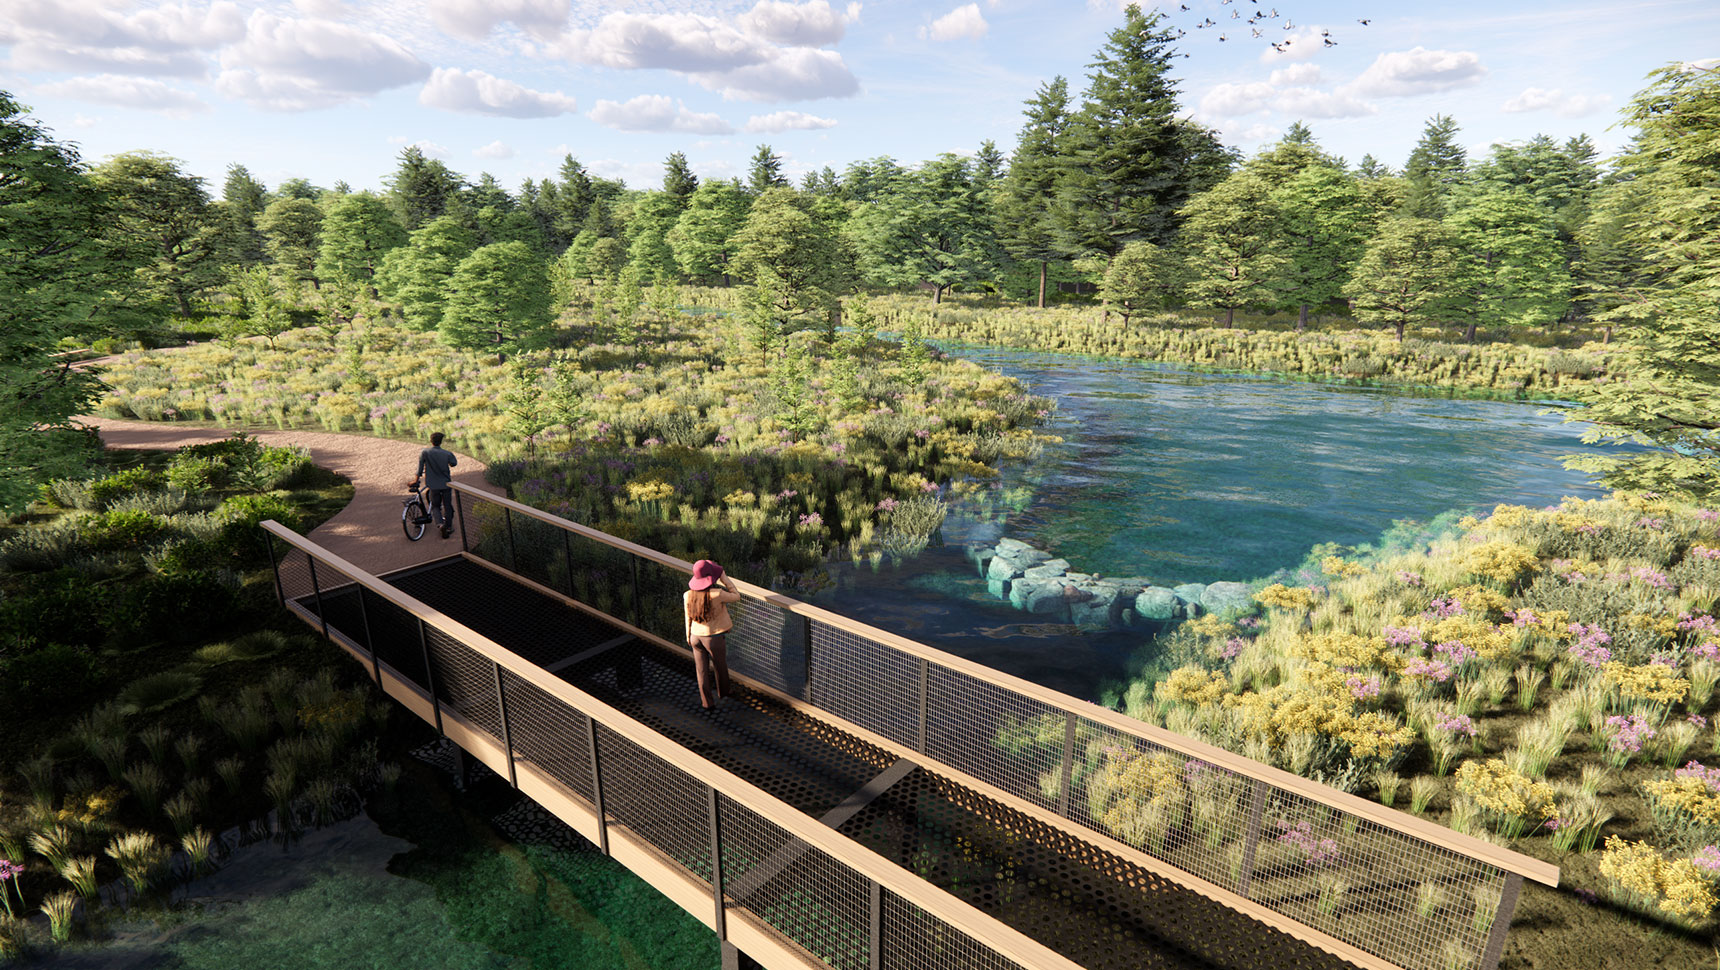 Rendering showing bridge over water for resilience improvements